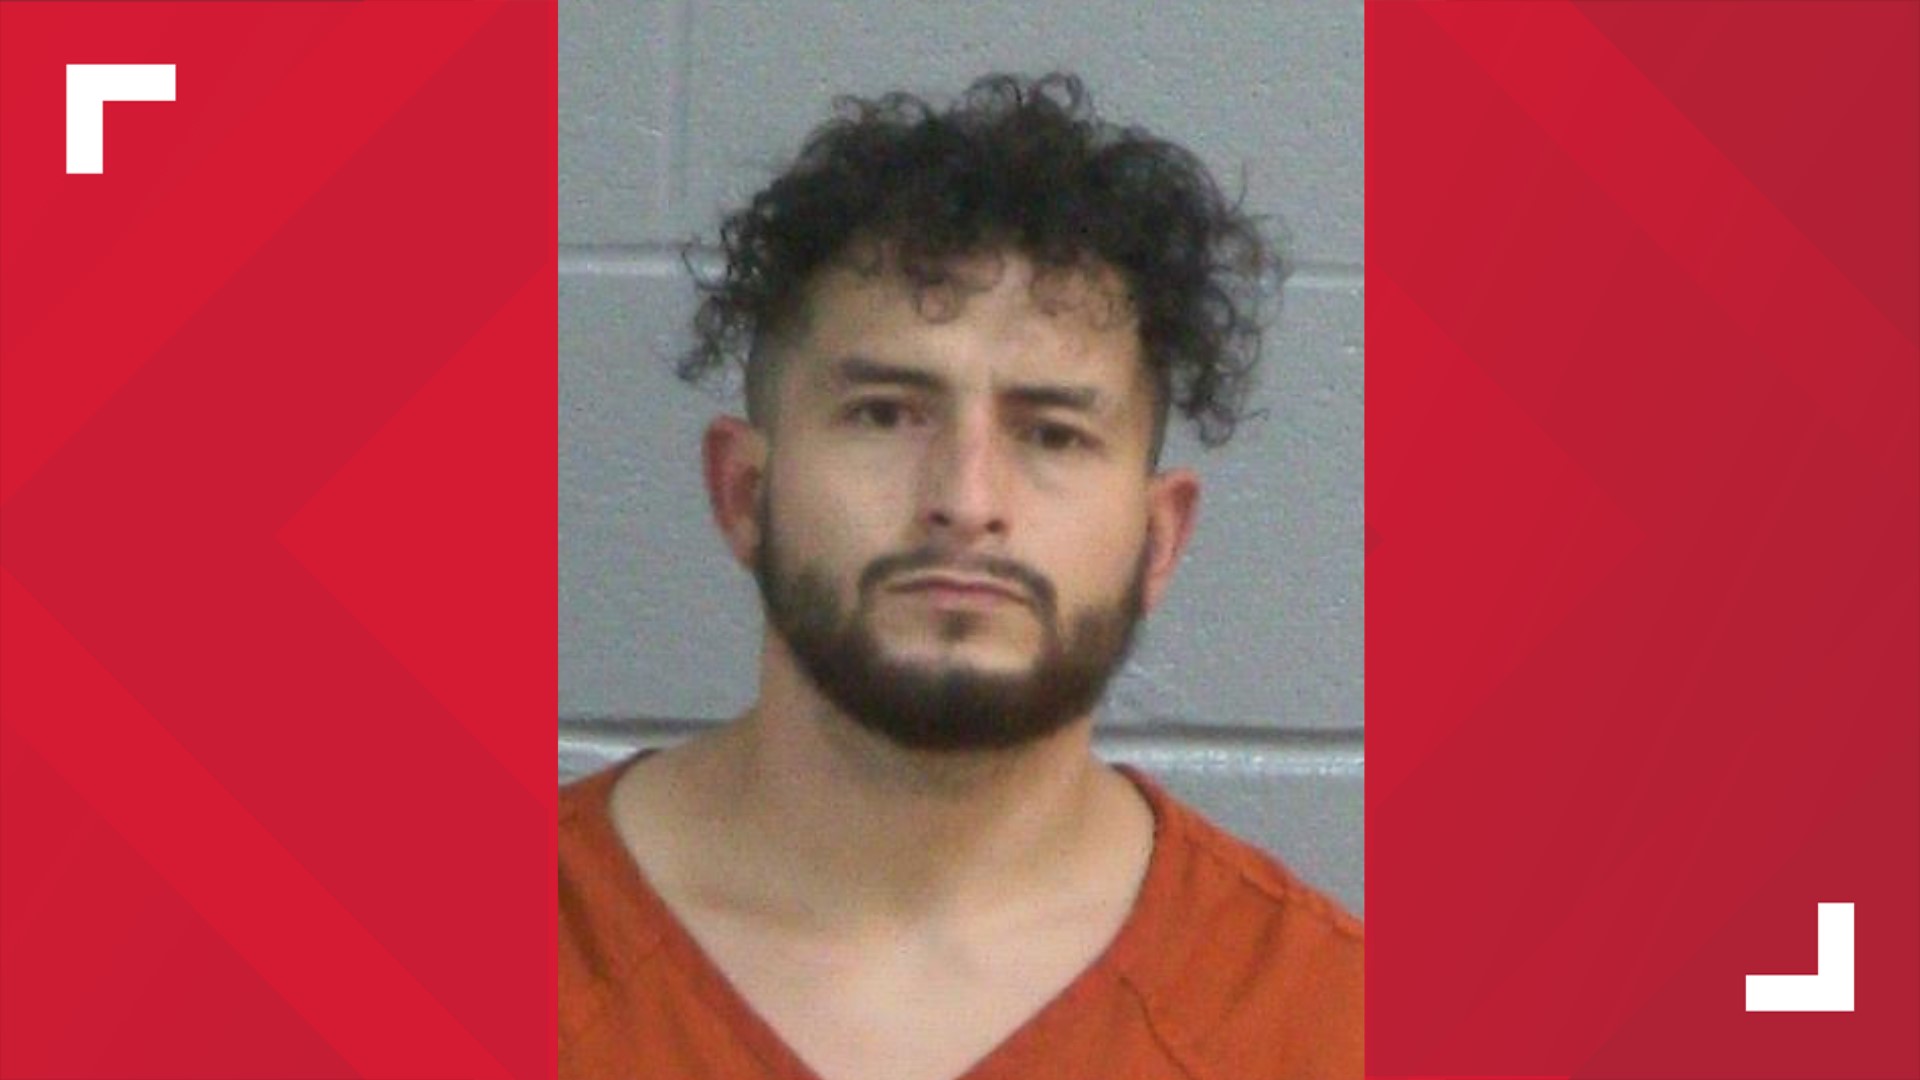 Raven Robert Rodriguez was booked into the Midland County Detention Center and charged with capital murder.